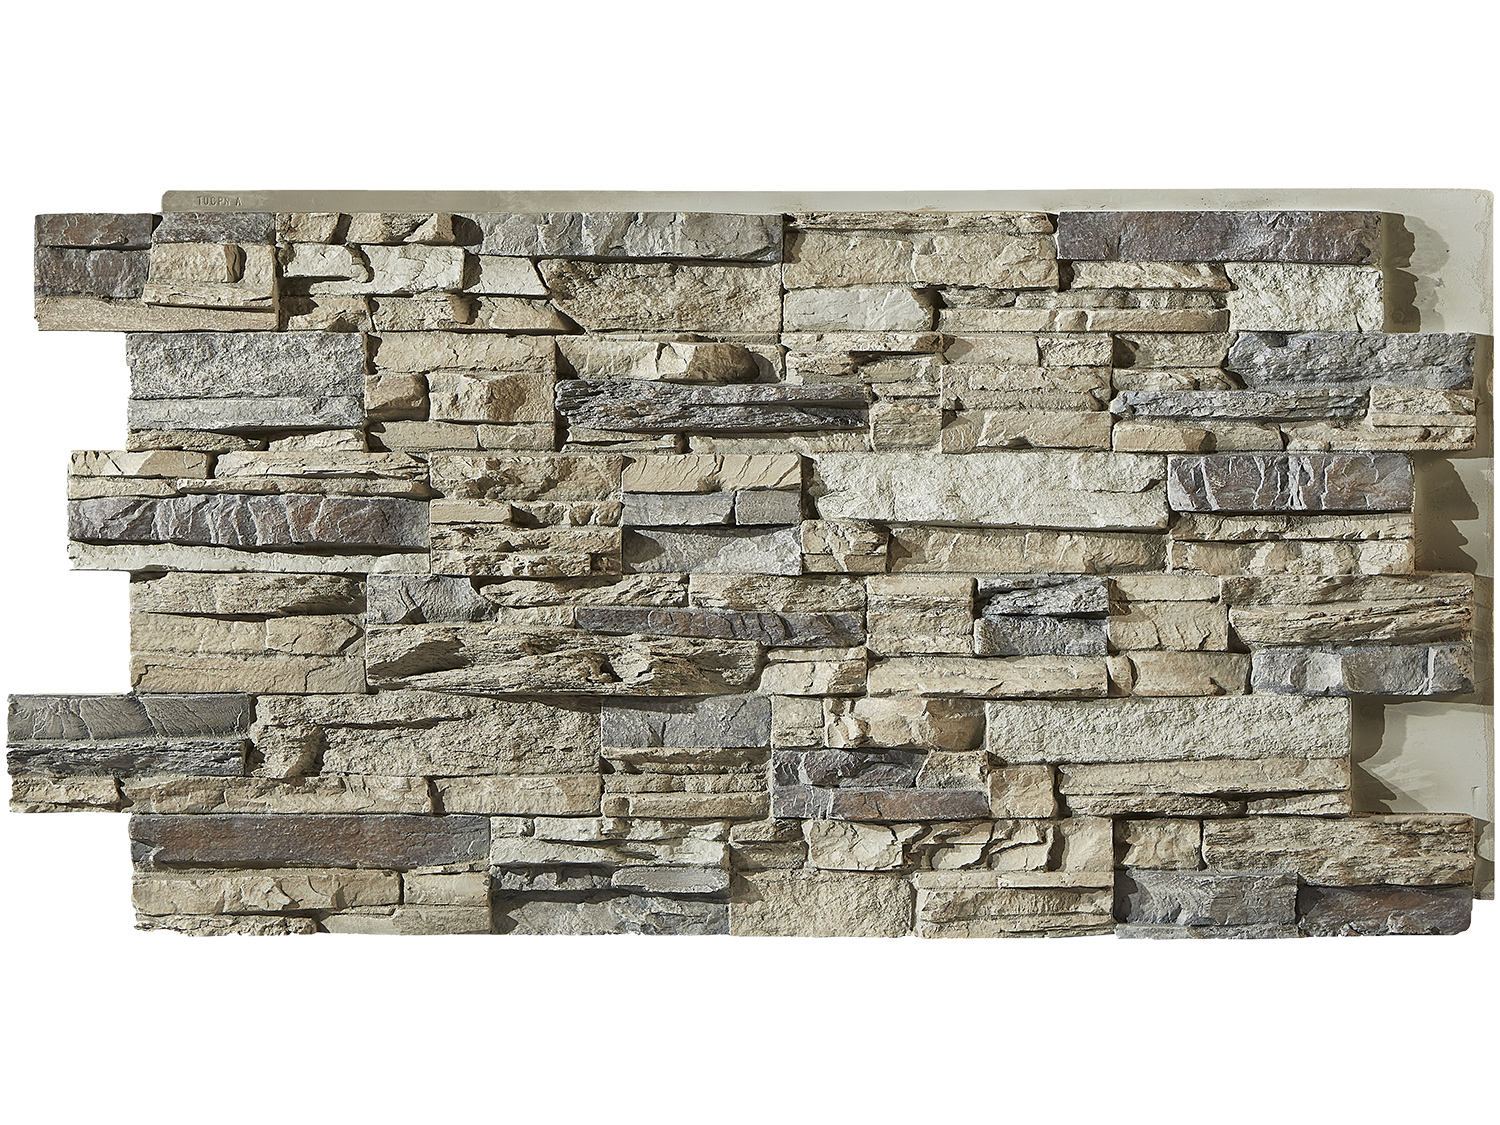 Are the ends and tops of your stackstone panels painted?